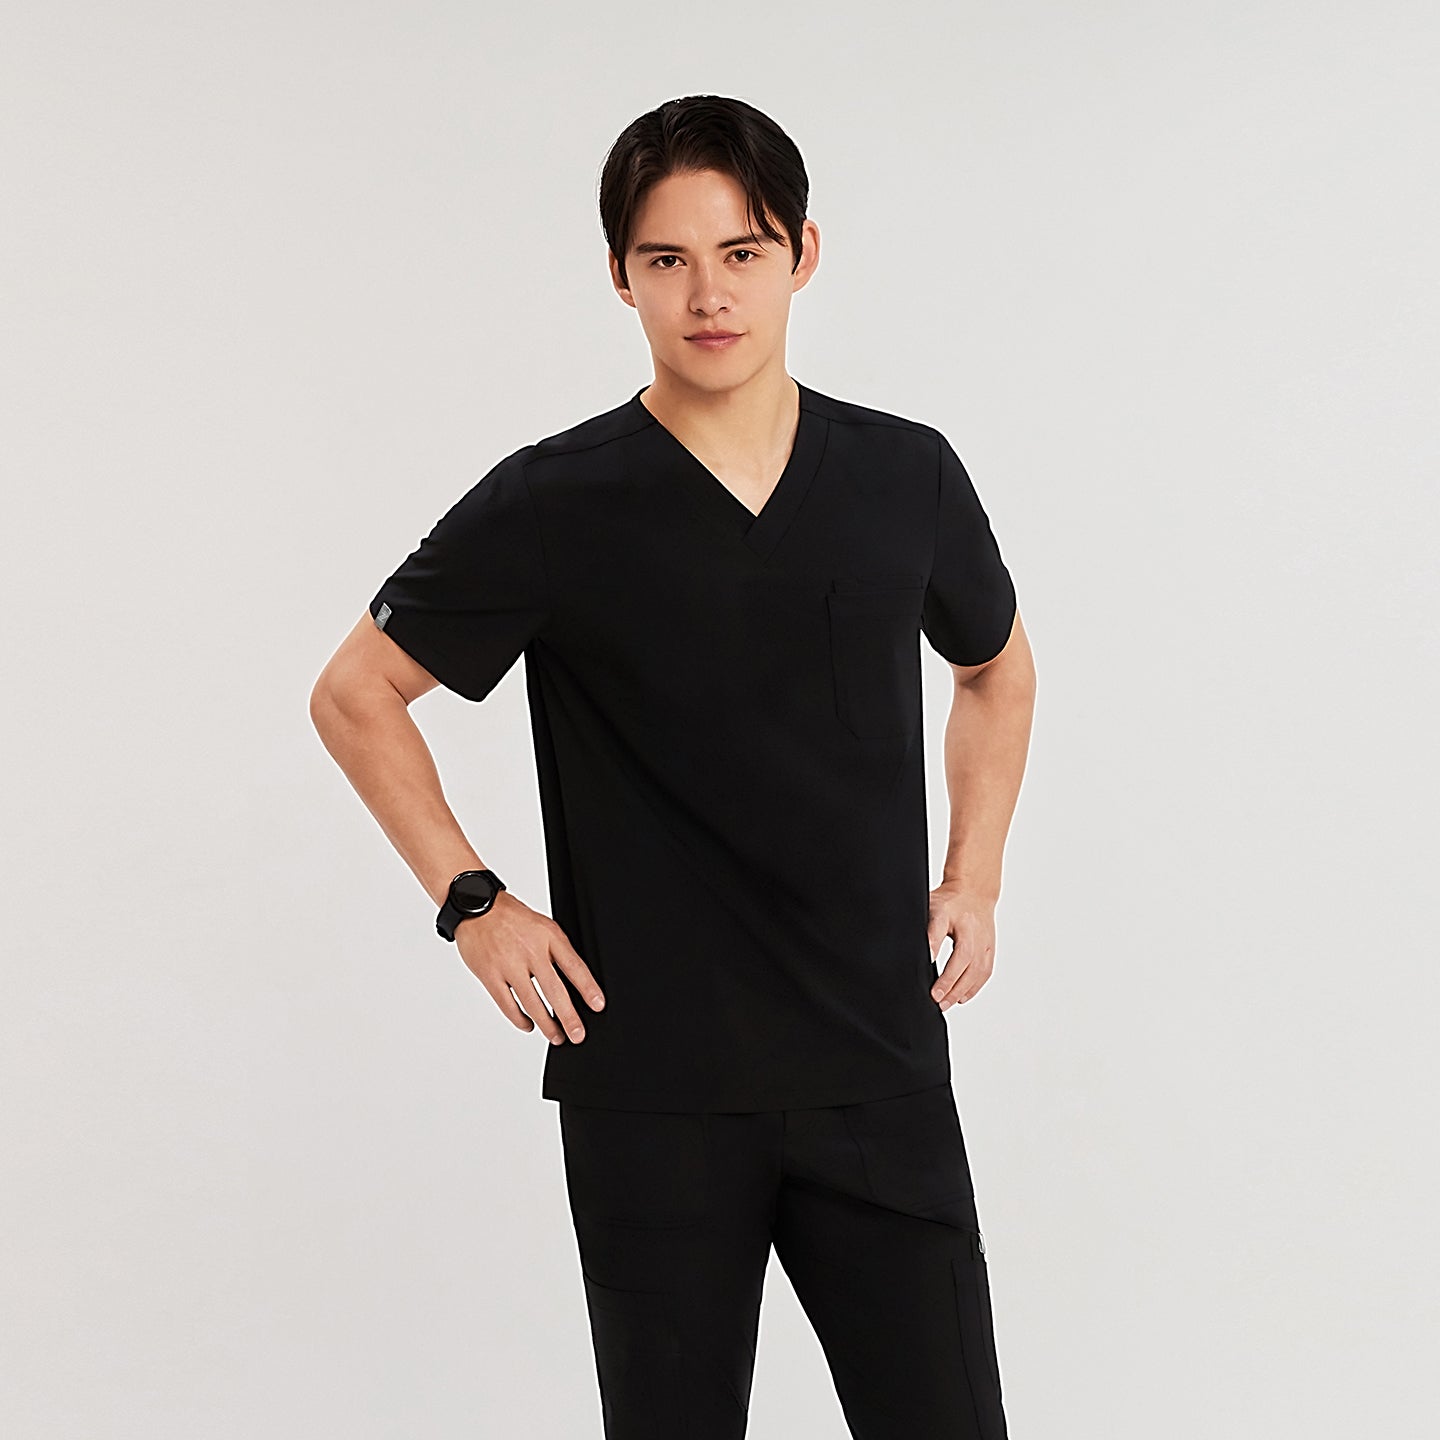 Man in black Zenir scrub top with chest pocket, standing with hands on hips, looking at the camera,Black